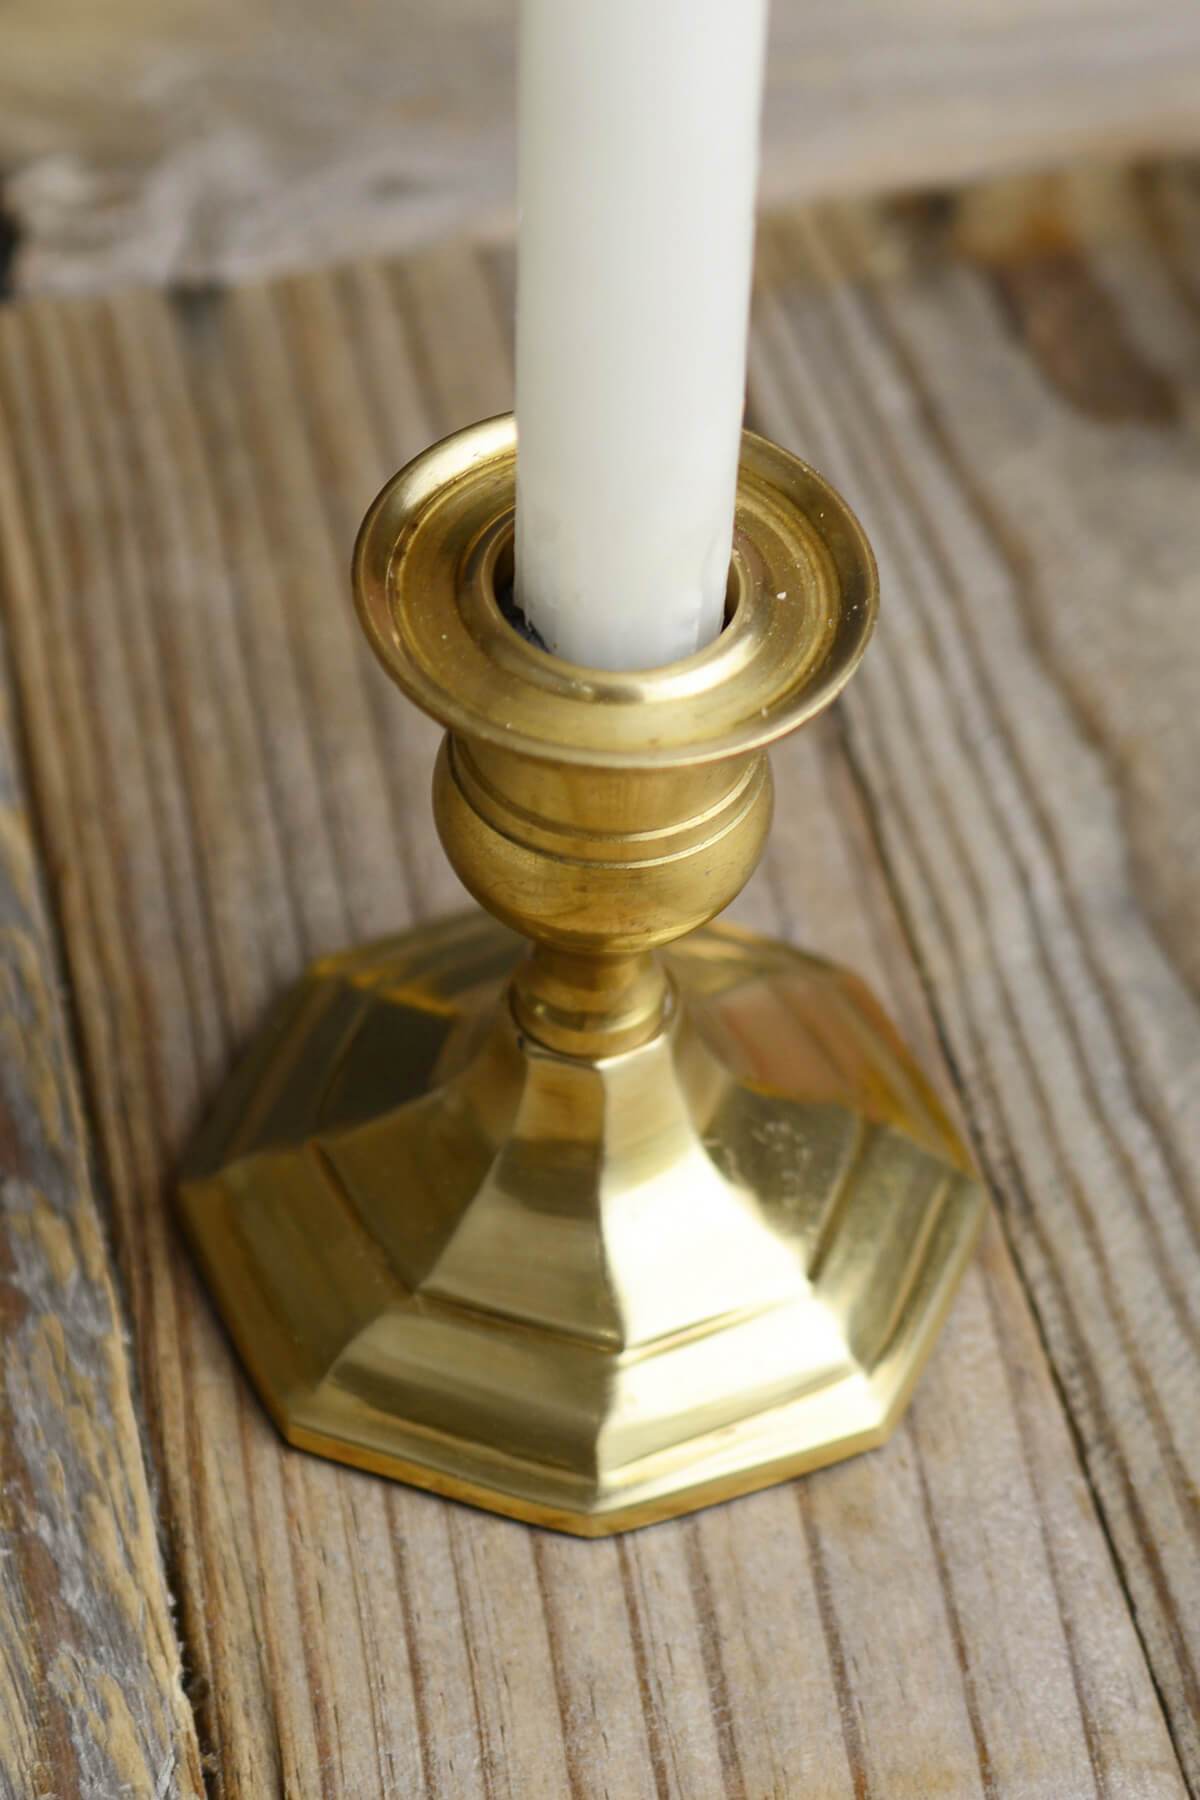 Gold Metal 3.75 Taper Candle Holder, Antique Candlestick - Quick Candles